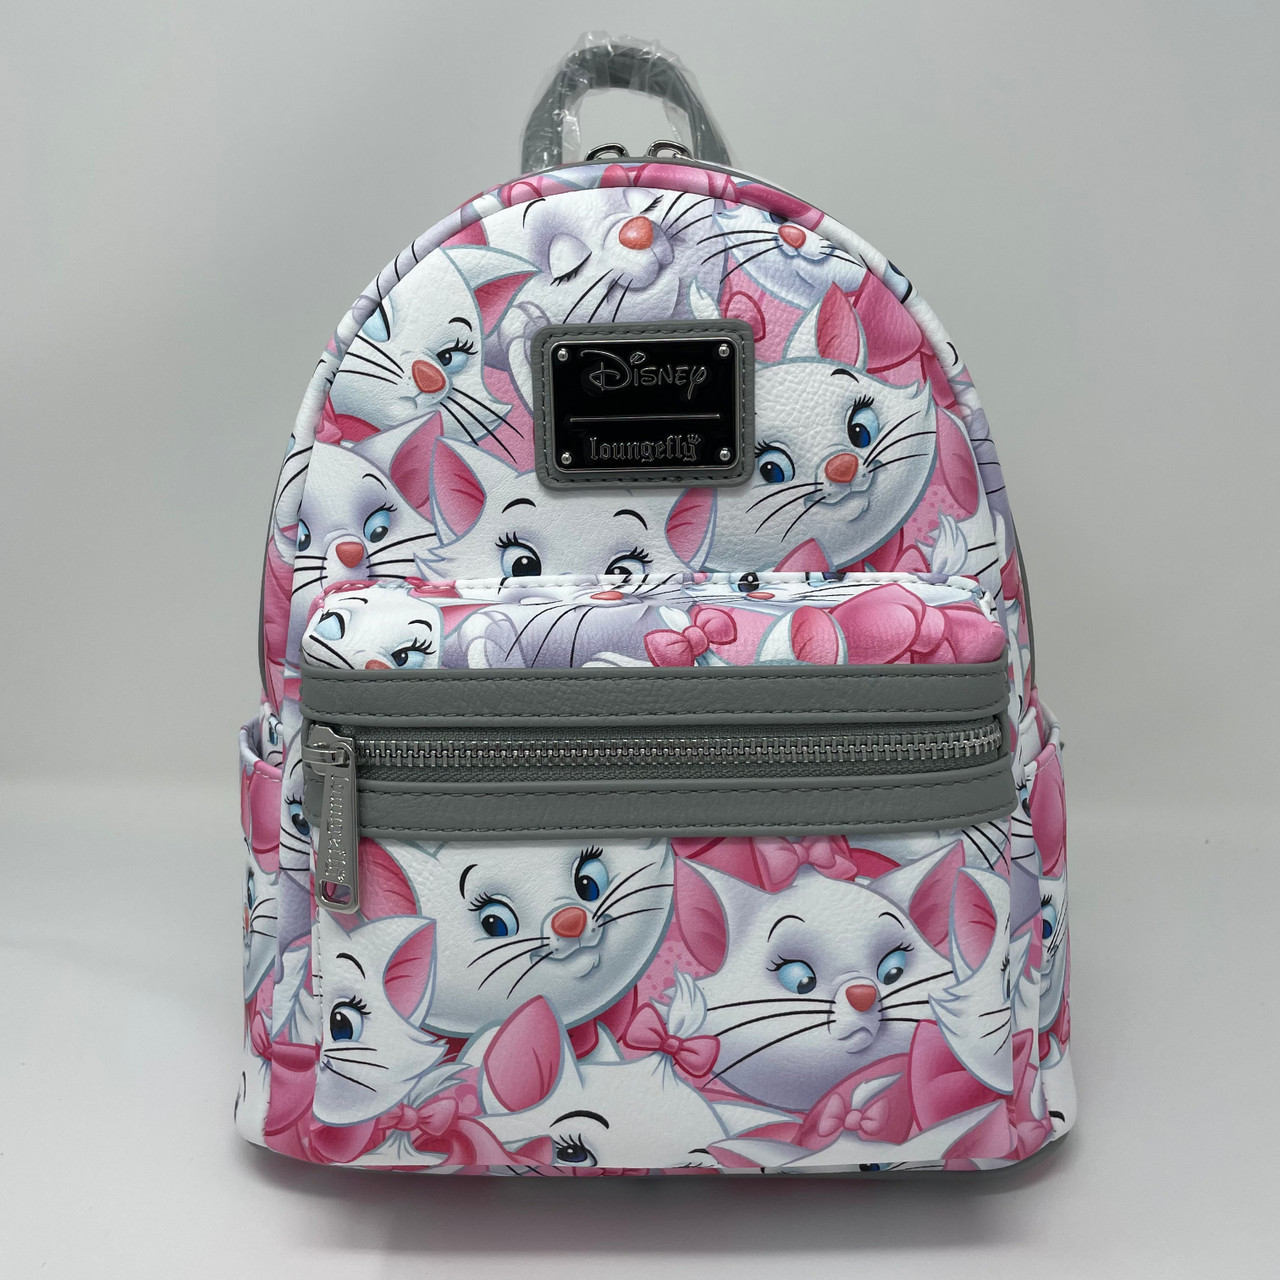 Loungefly Disney Mickey & Minnie Springtime Car Ride Exclusive Mini Backpack